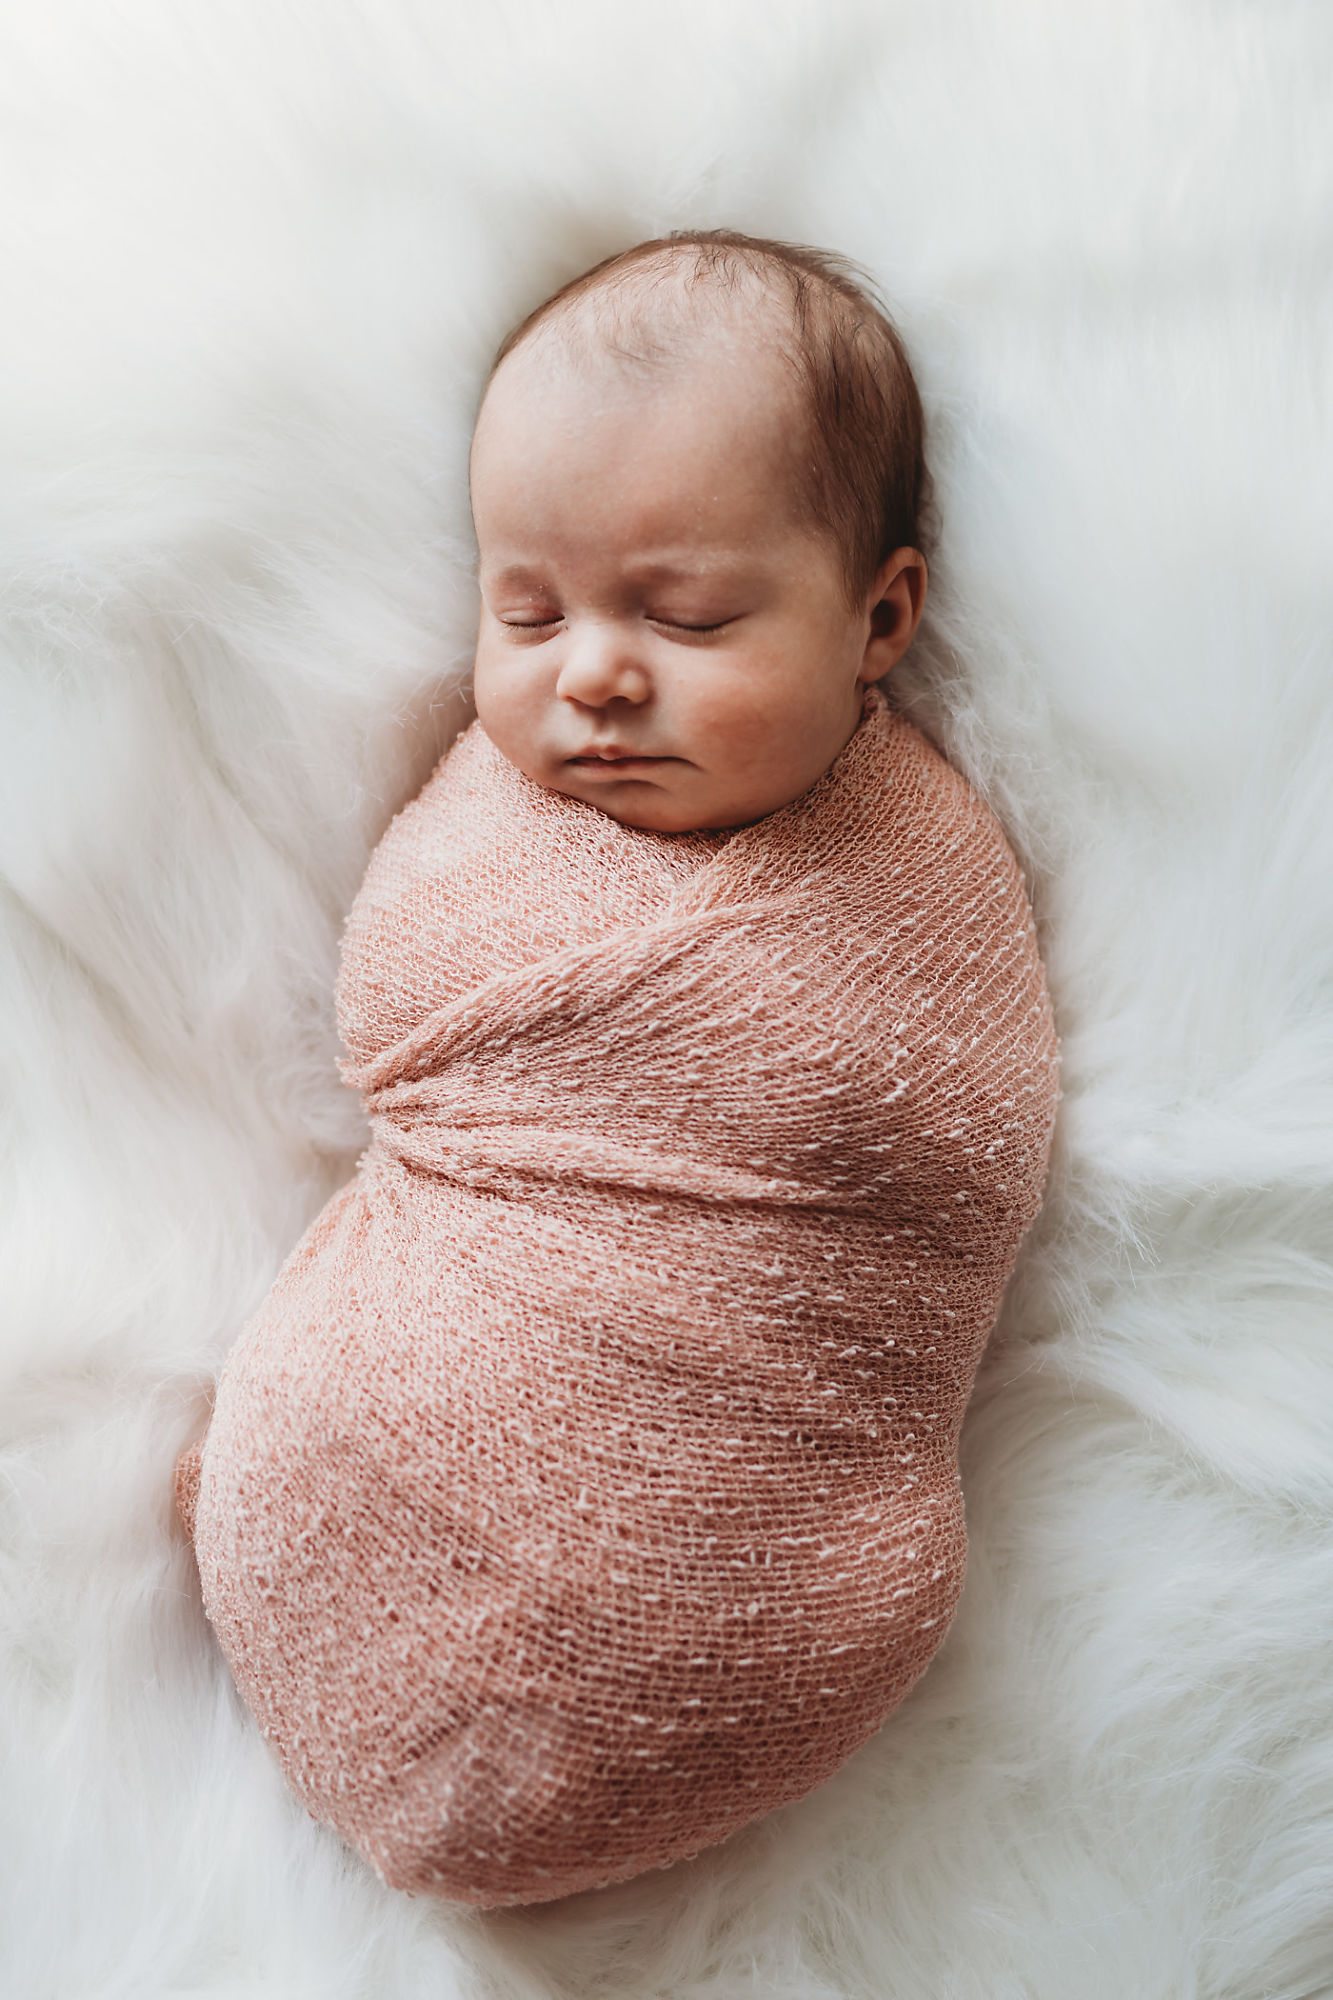 Lifestyle Hamilton Newborn Photographer Jennifer Blaak captures baby swaddled in a gentle moment of rest during this newborn photography session in Hamilton.